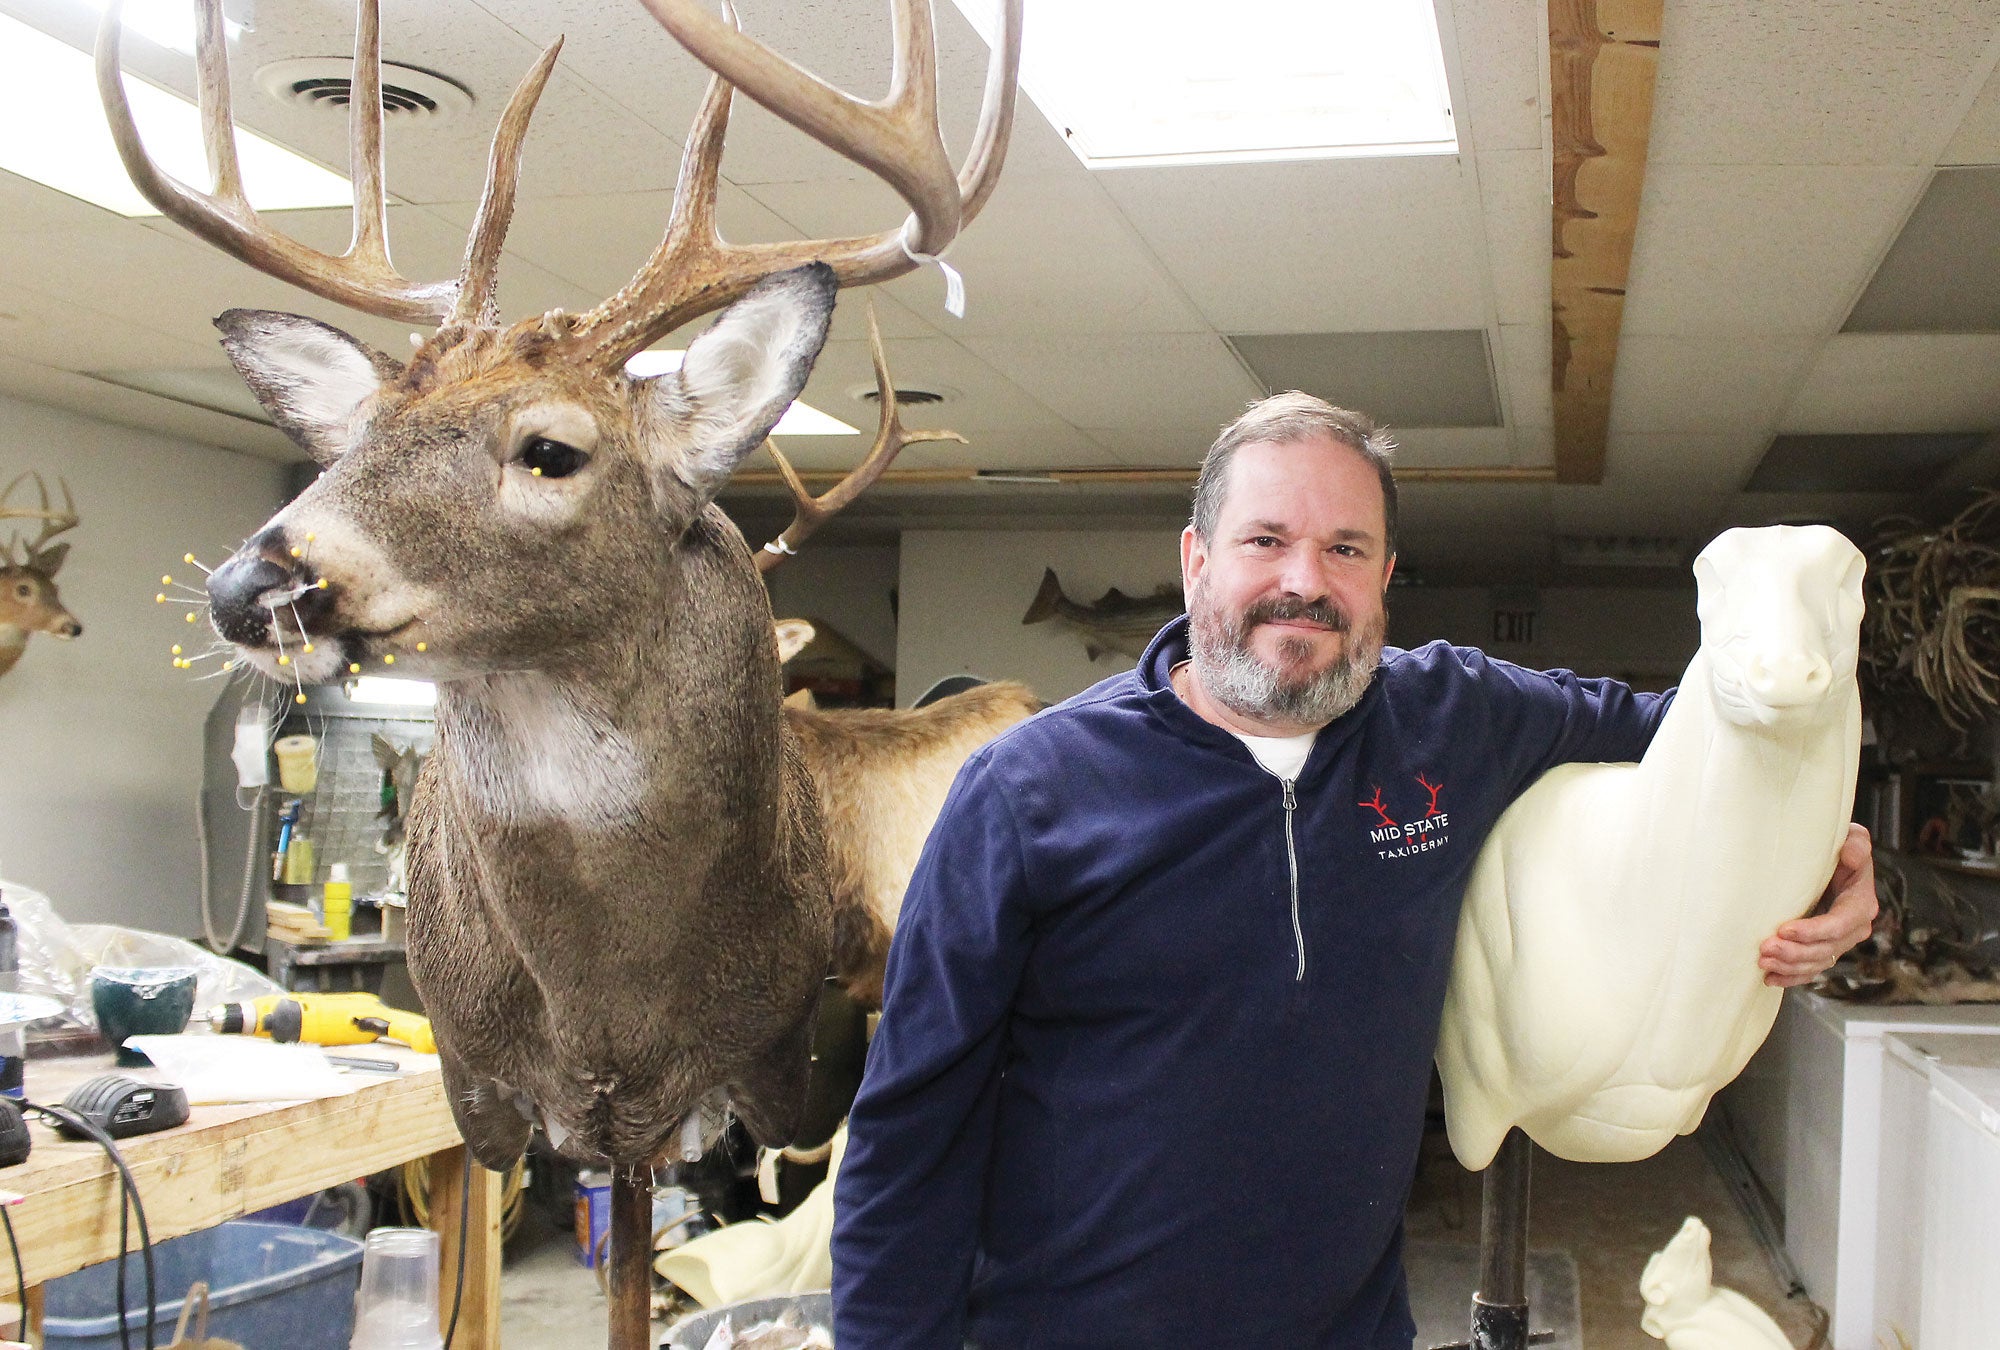 Not just stuffing animals: Cheak says Good taxidermy about respecting animal  - Winchester Sun | Winchester Sun